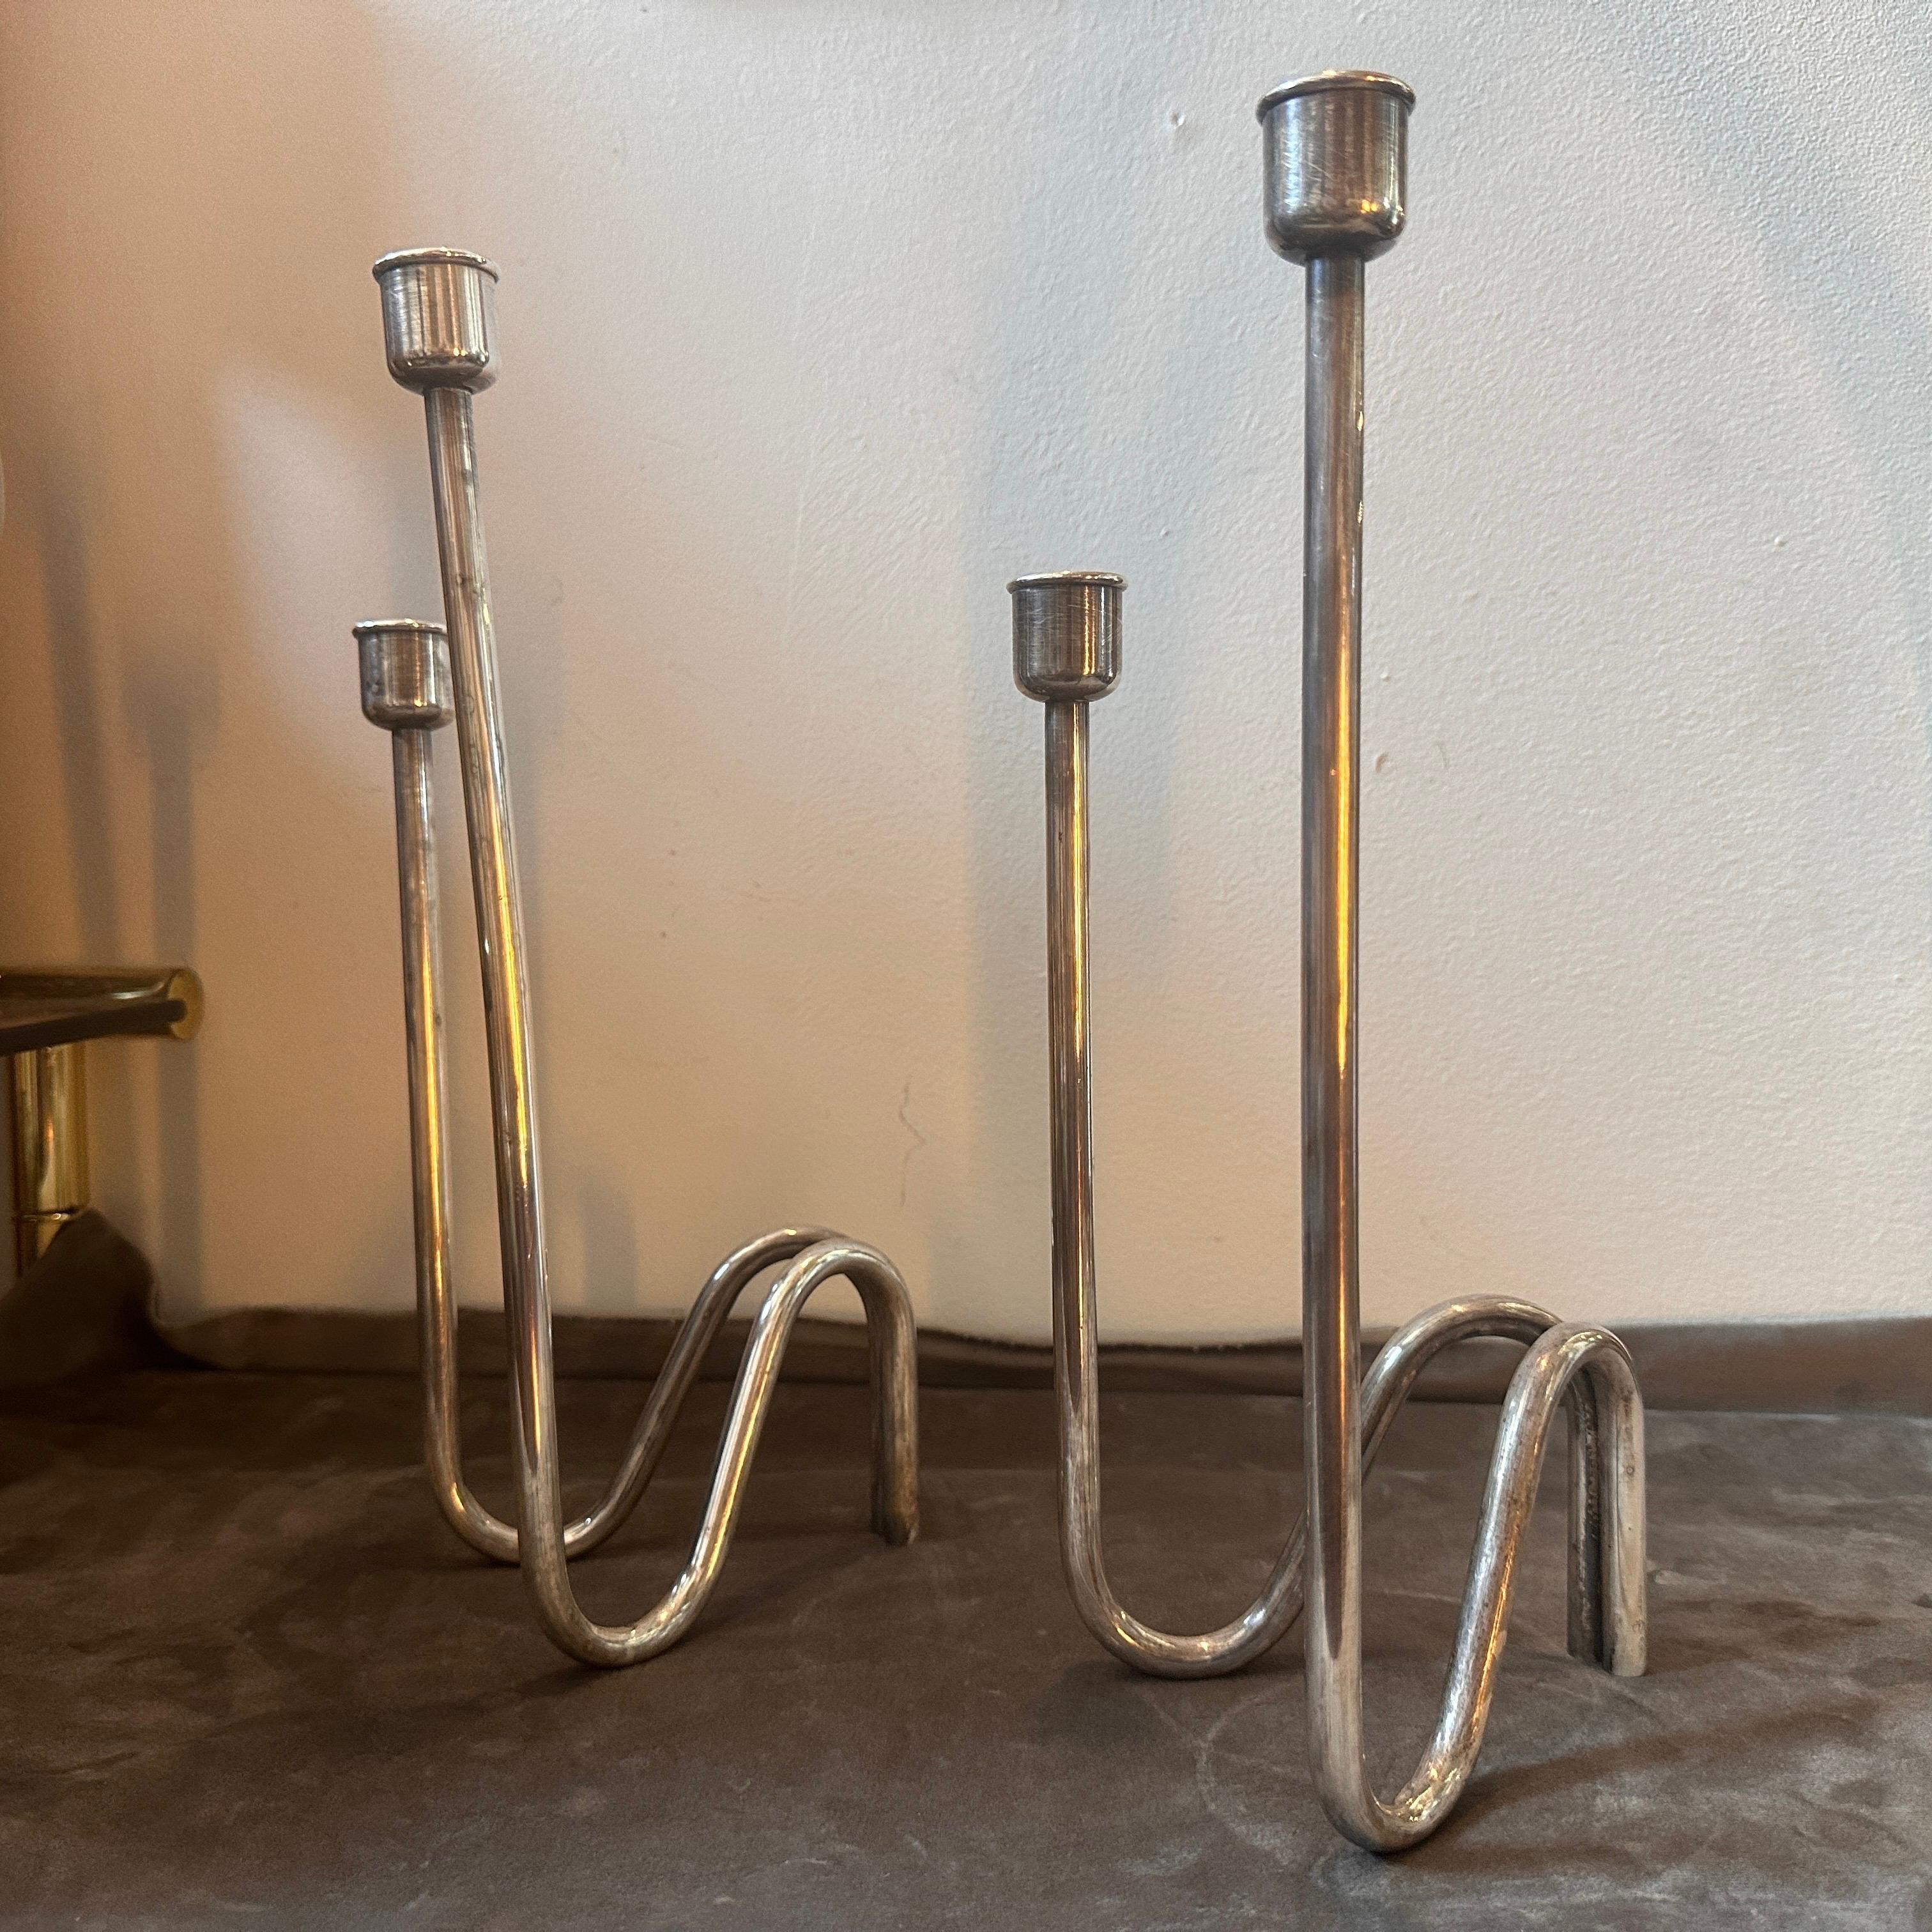 Two silver plated candle holders designed by Lino Sabattini and manufactured by Sabattini Argenteria in the Eighties. They have been manufactured in Italy marked on a side, they are in very good conditions. These Lino Sabattini candelabras are a